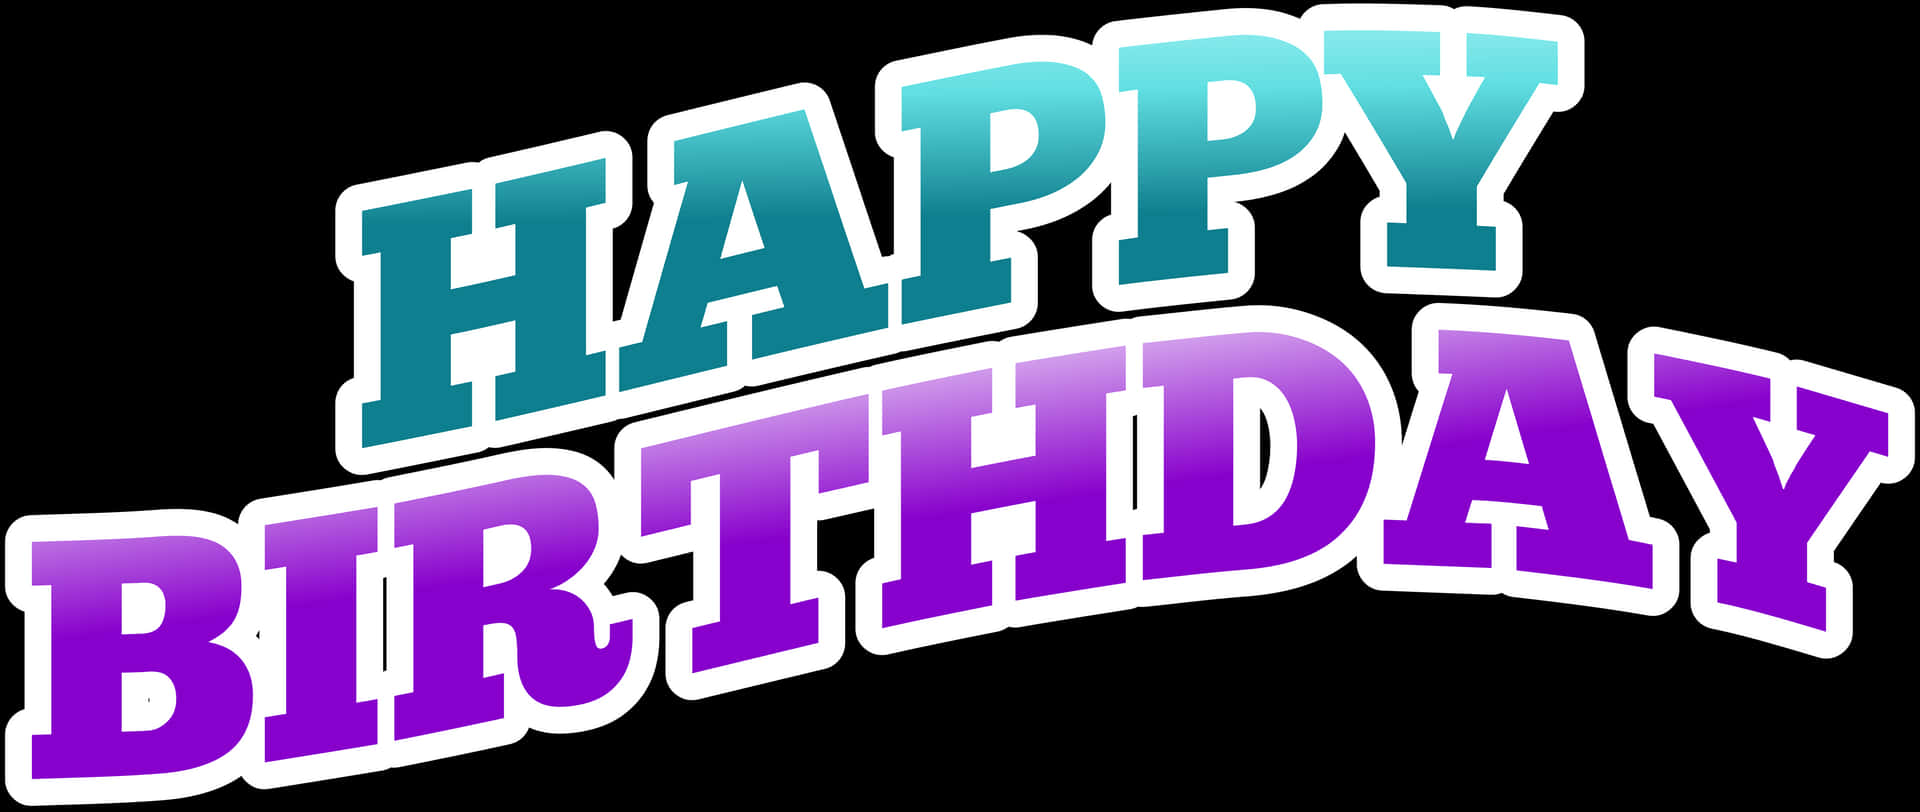 Colorful Happy Birthday Text Banner PNG image